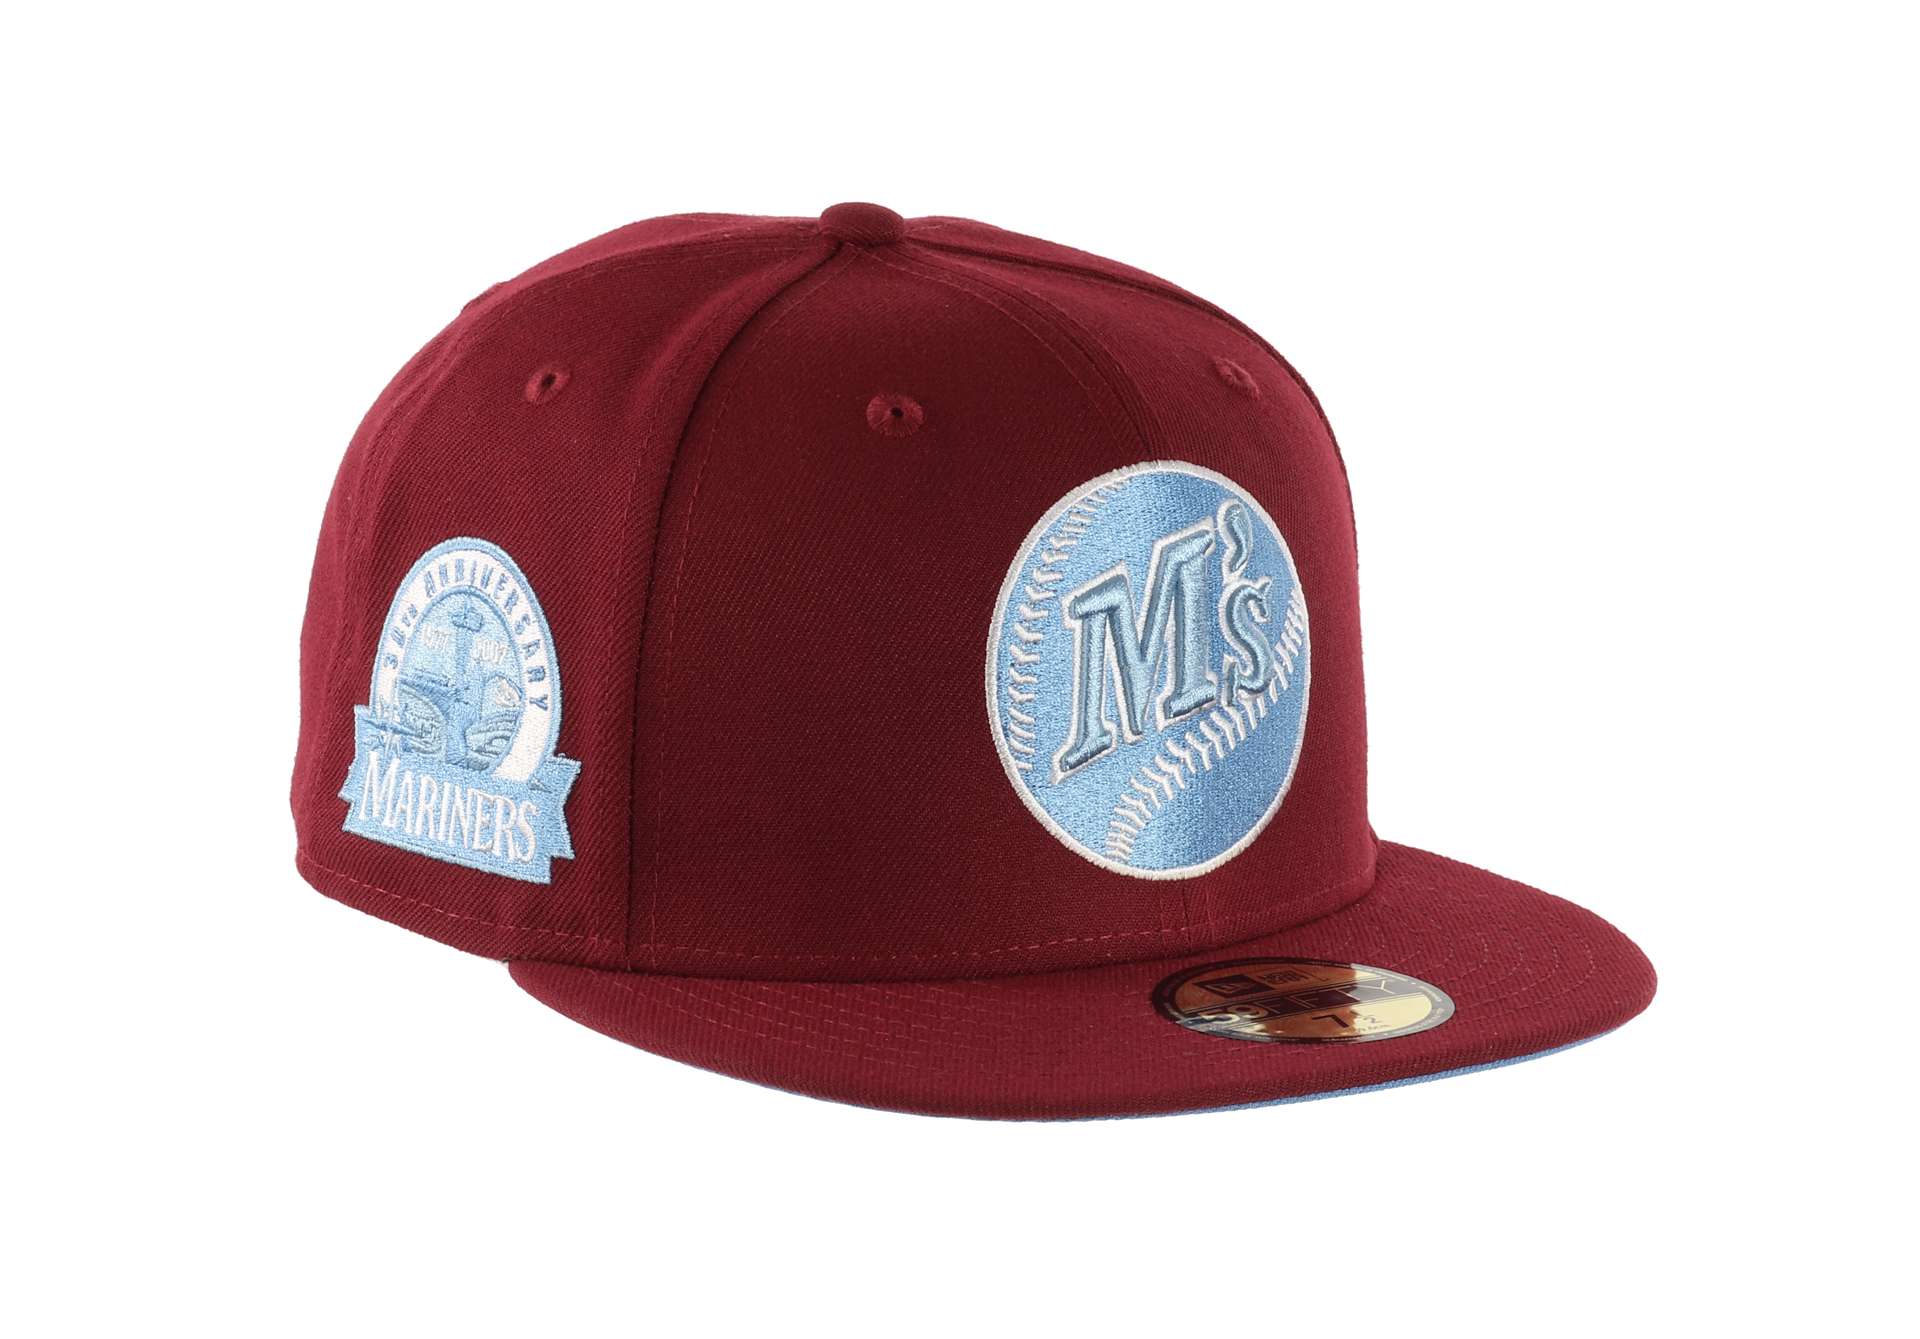 Seattle Mariners MLB Cooperstown 30th Anniversary Sidepatch Maroon Blue 59Fifty Basecap New Era